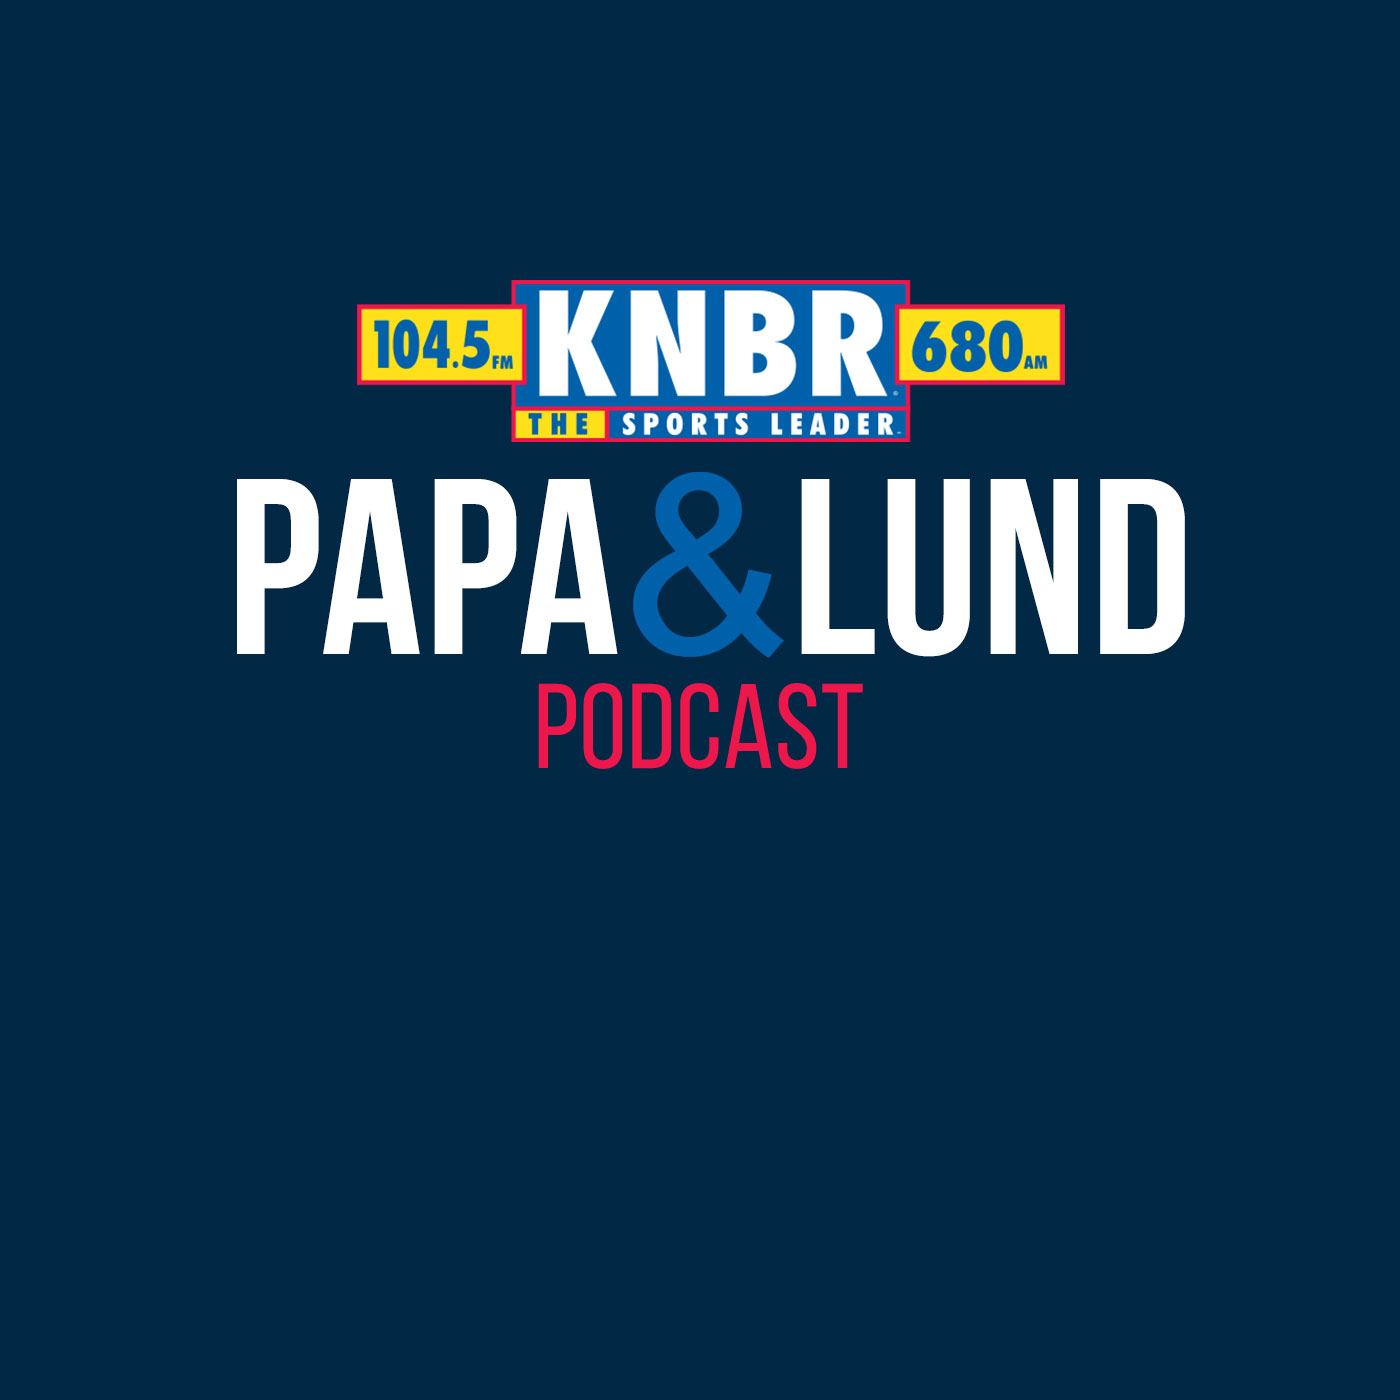 6-13 Andy Dolich joins Papa & Lund and reminisces on some of his favorite moments with Jerry West